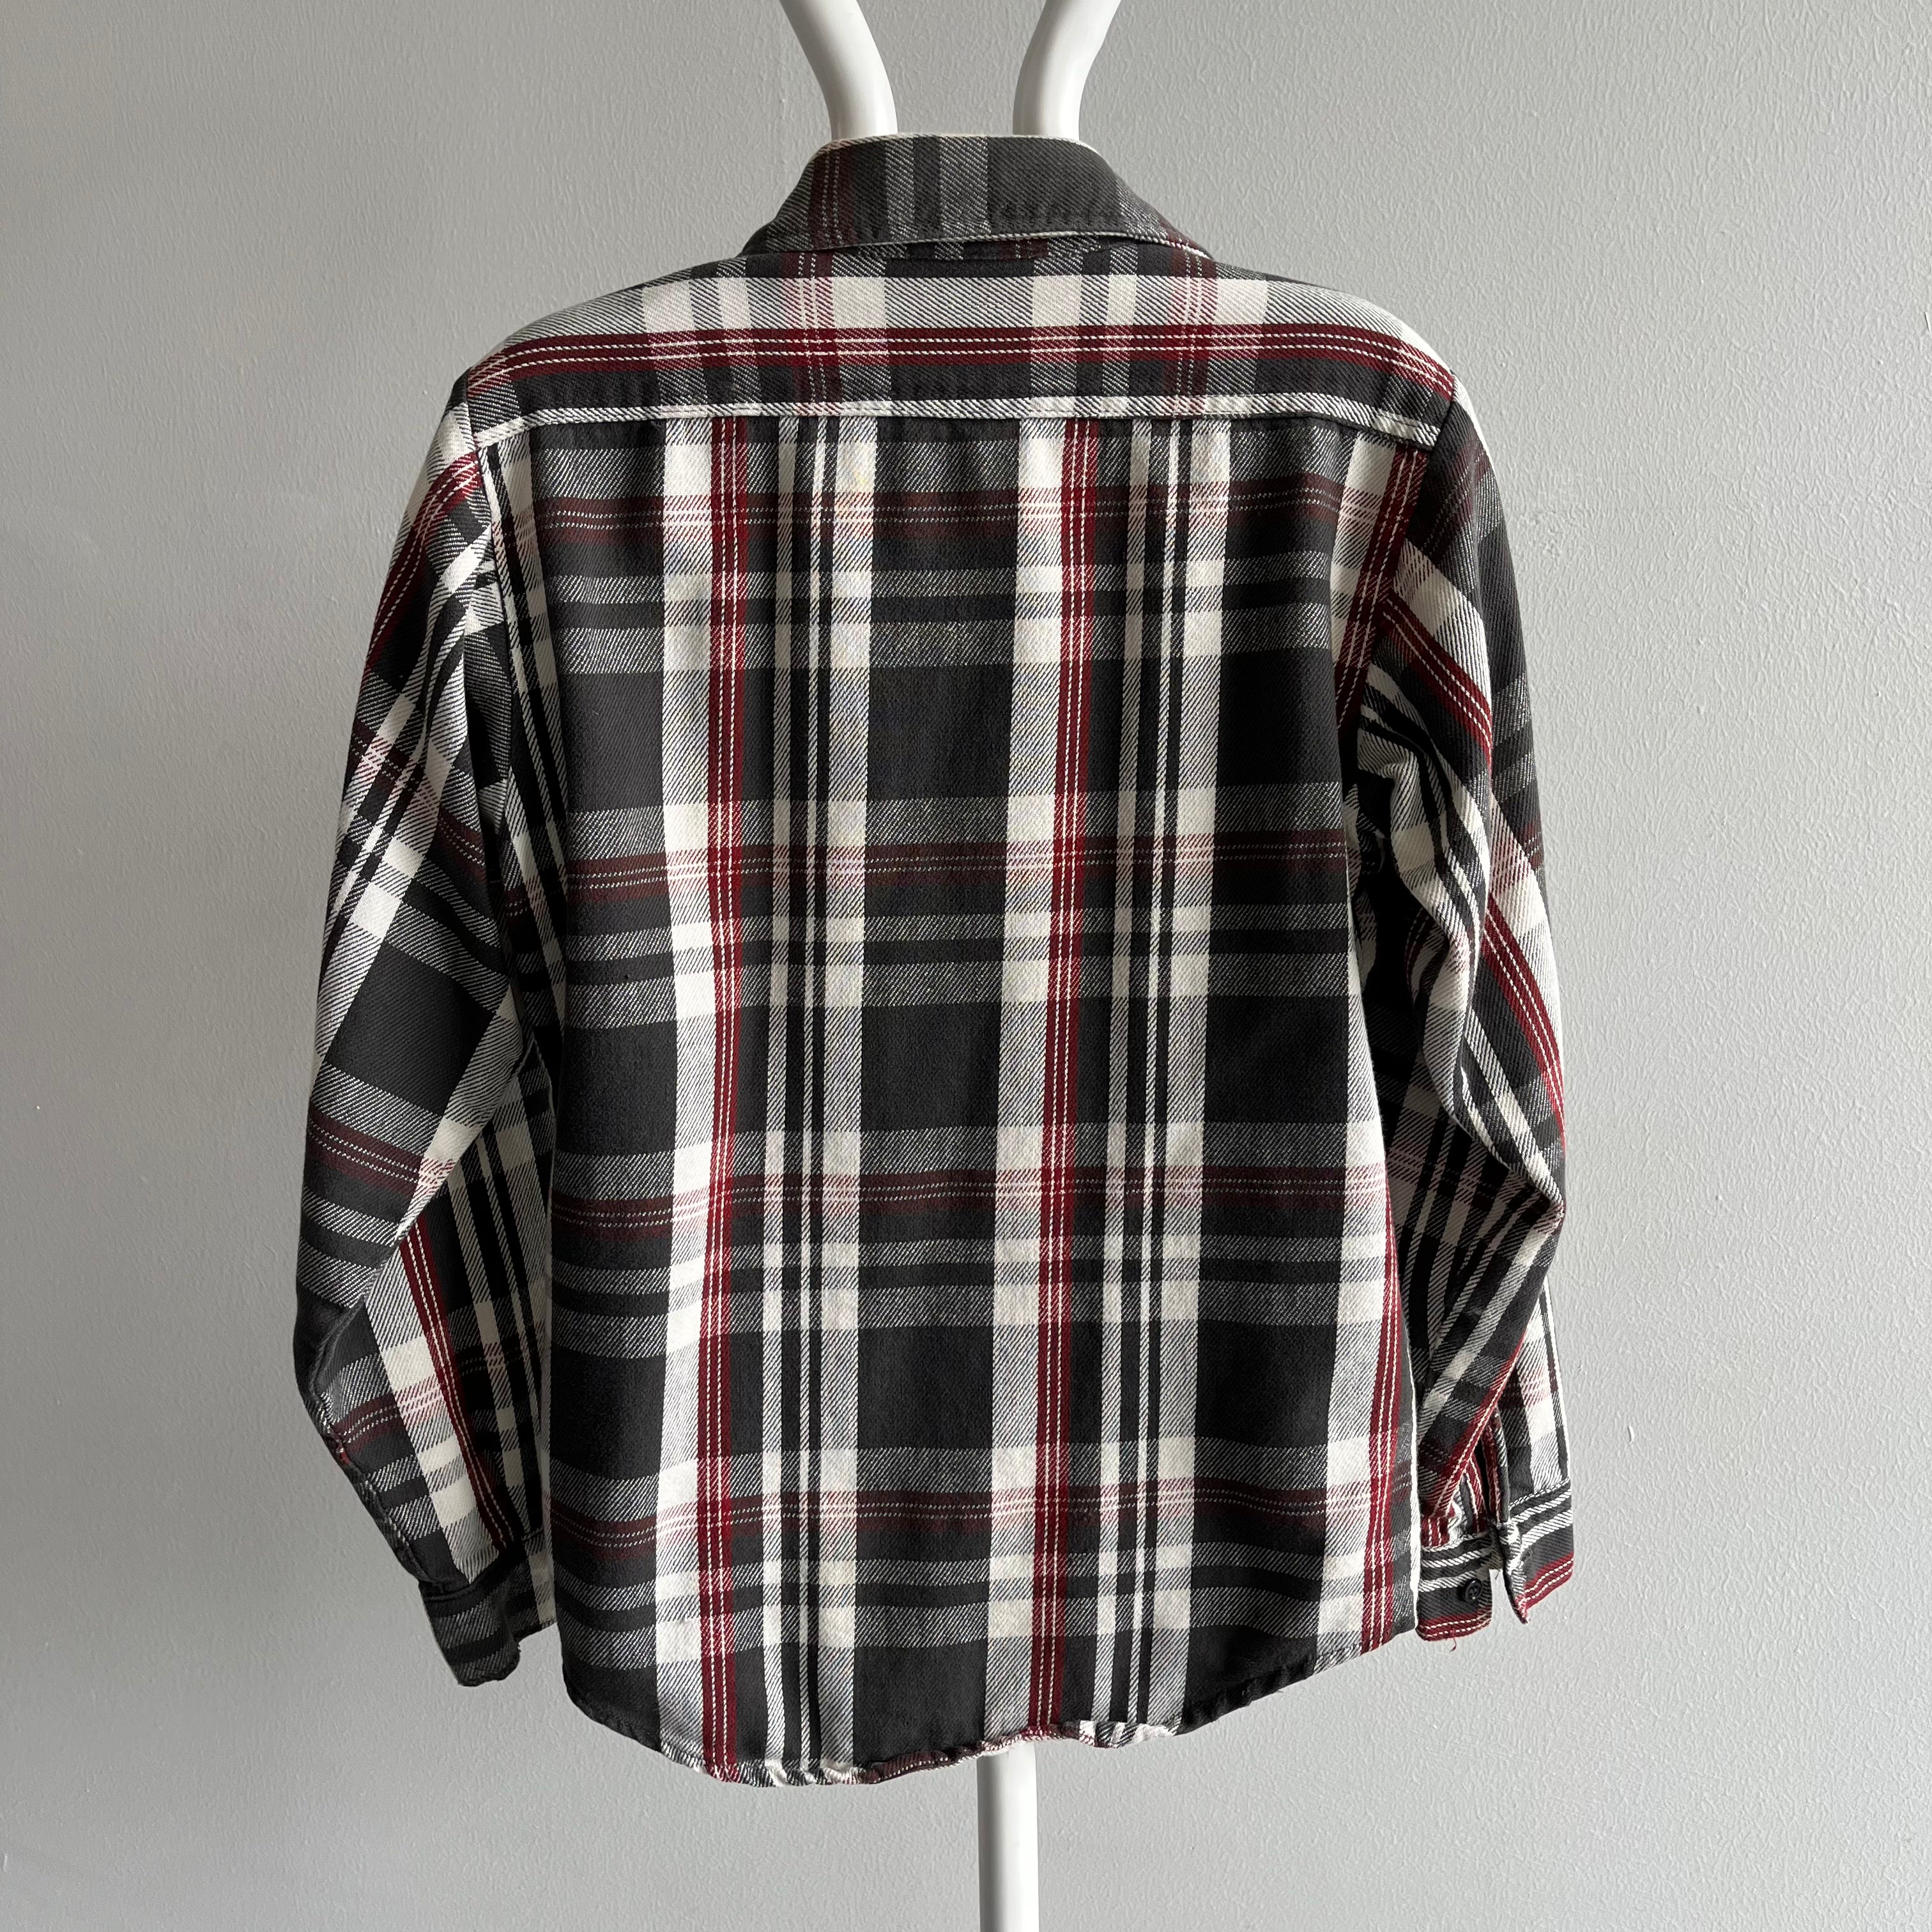 1980s/90s Five Brothers Dark Gray and Burgundy Cotton Flannel